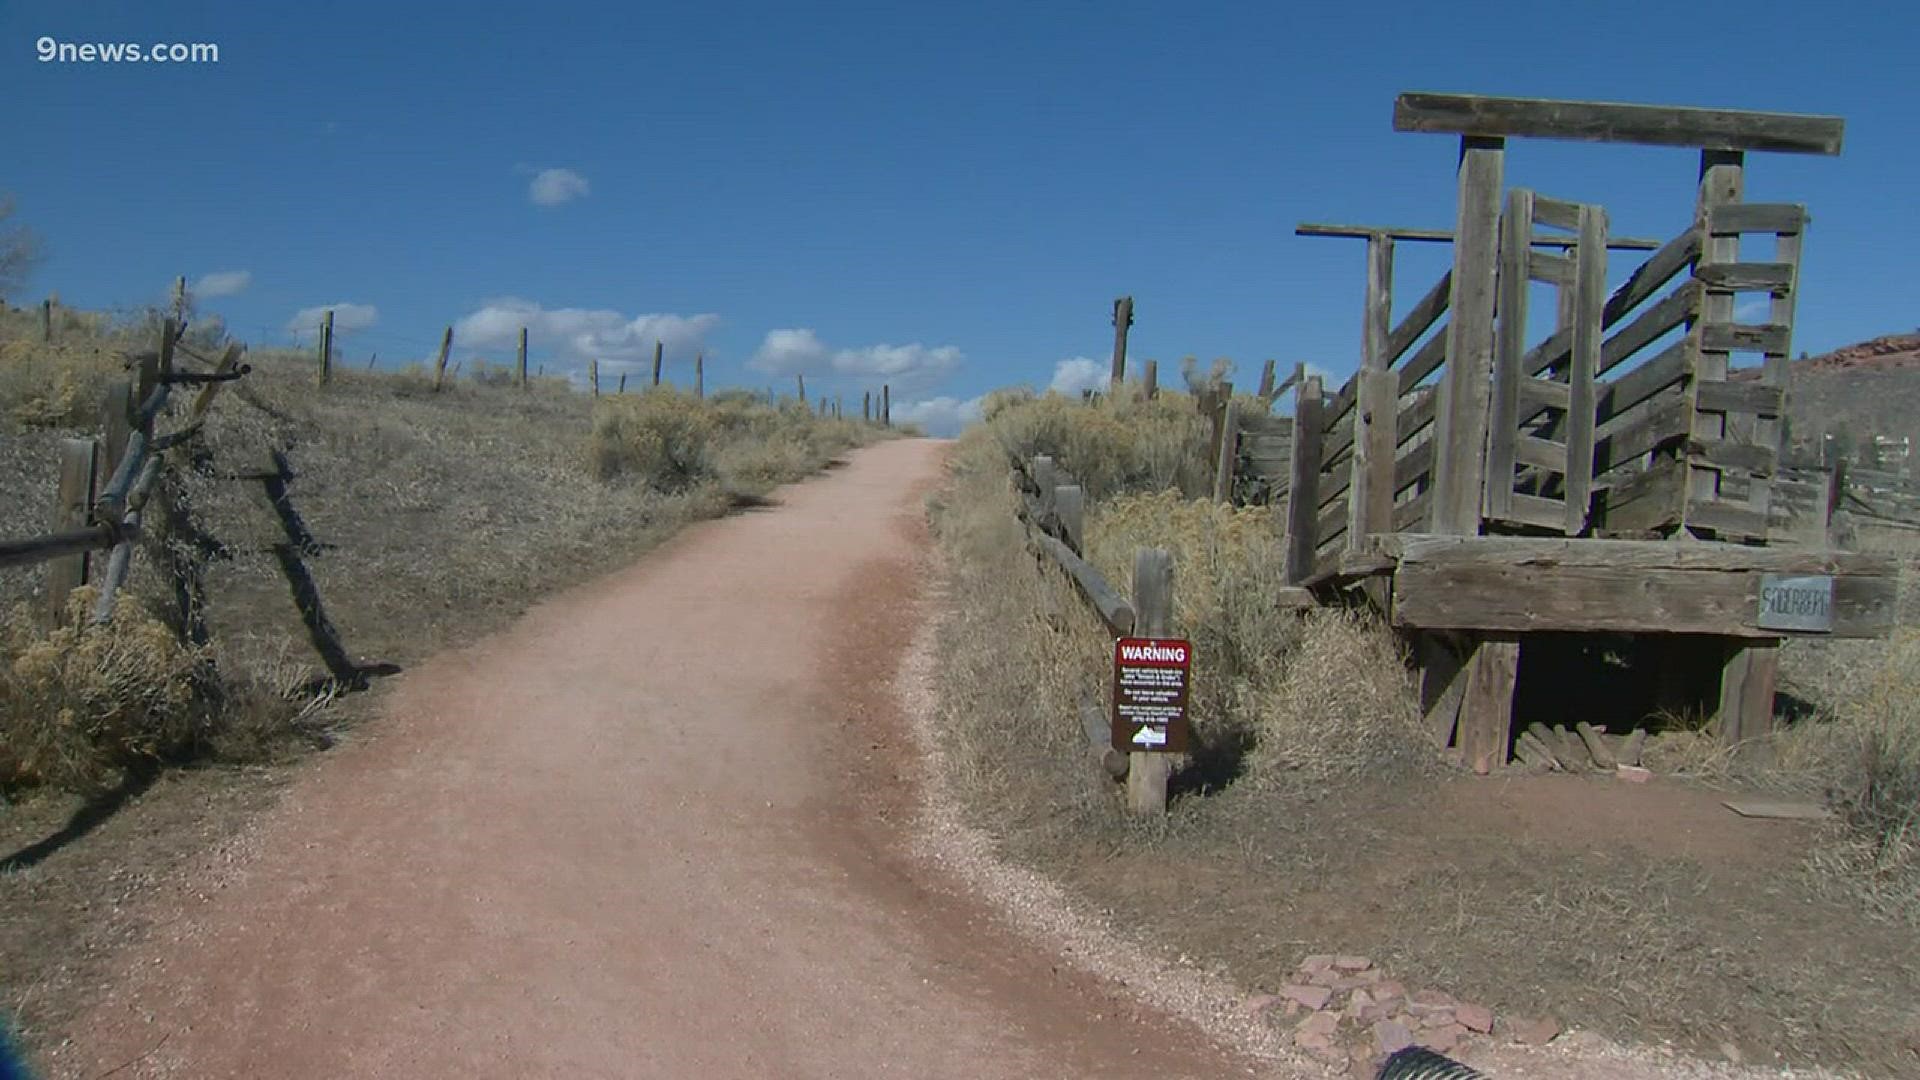 The trail runner who strangled the mountain lion to death during the attack prompted Colorado Parks and Wildlife to conduct an investigation. Big cat activity is being monitored on the trails.